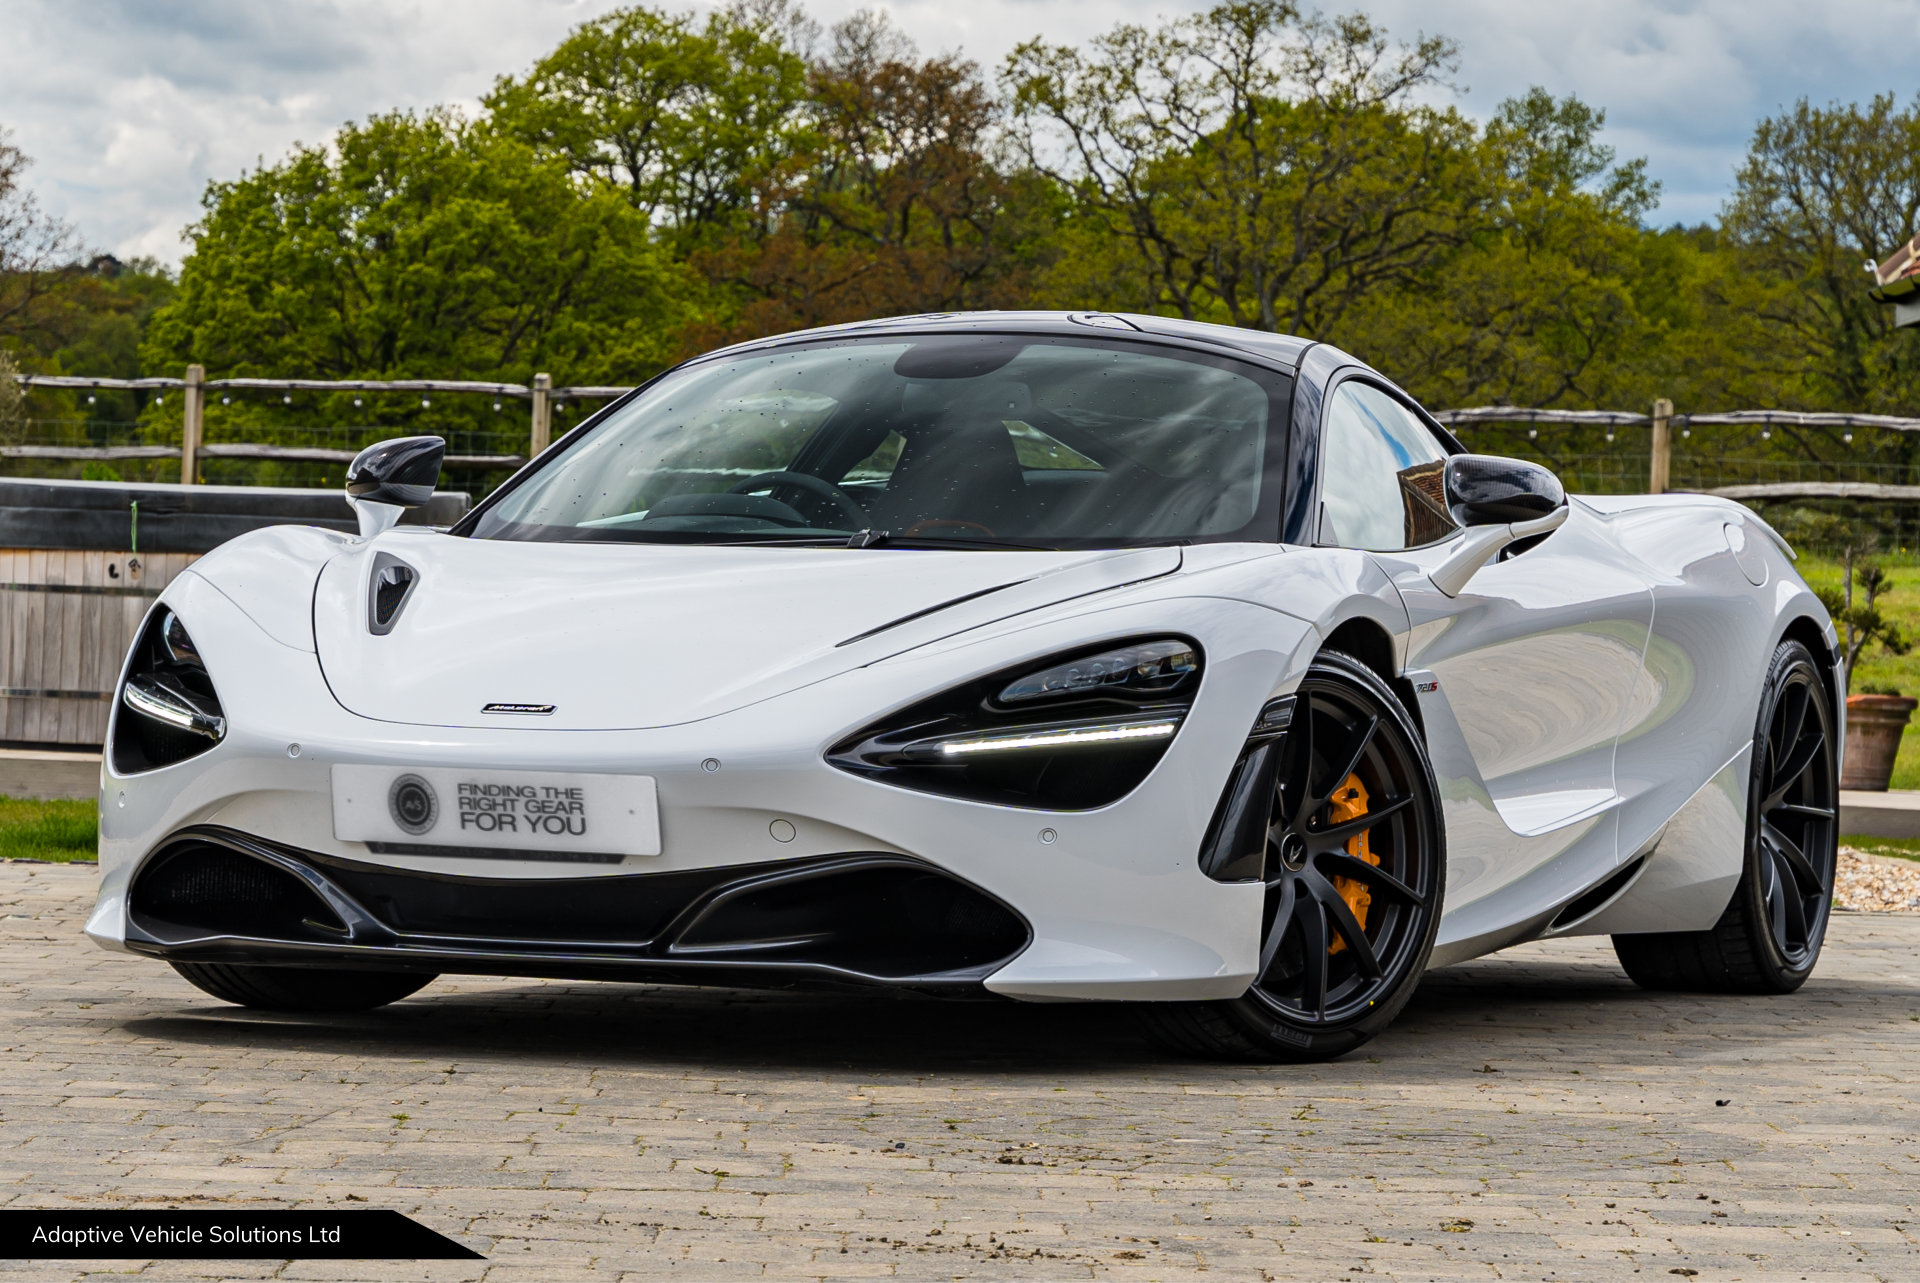 2018 18 McLaren 720s Performance Coupe White near side front view